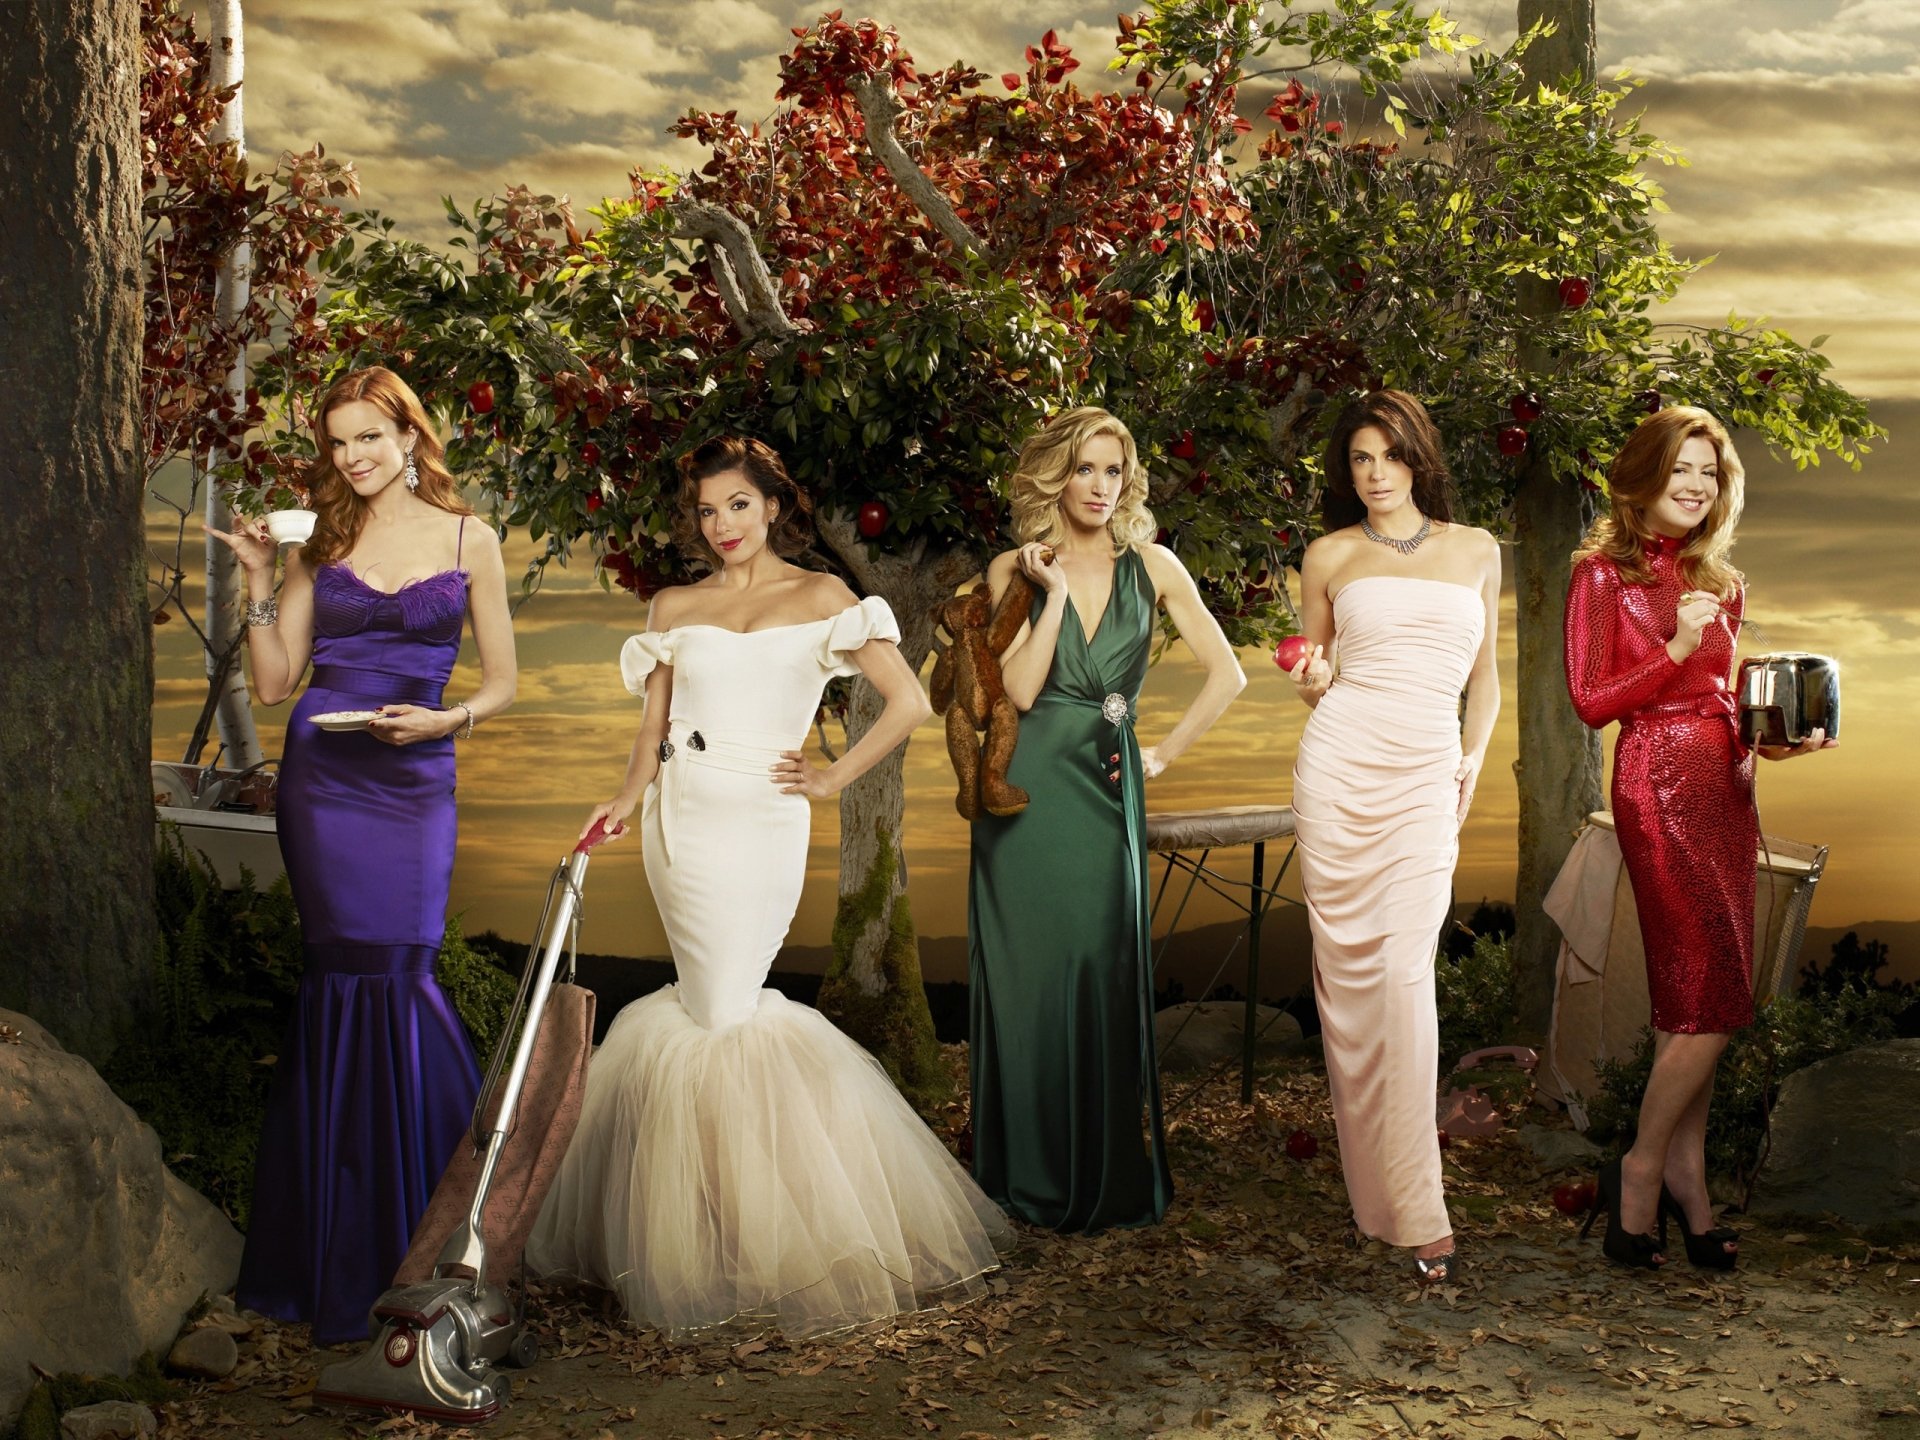 Desperate Housewives Wallpapers